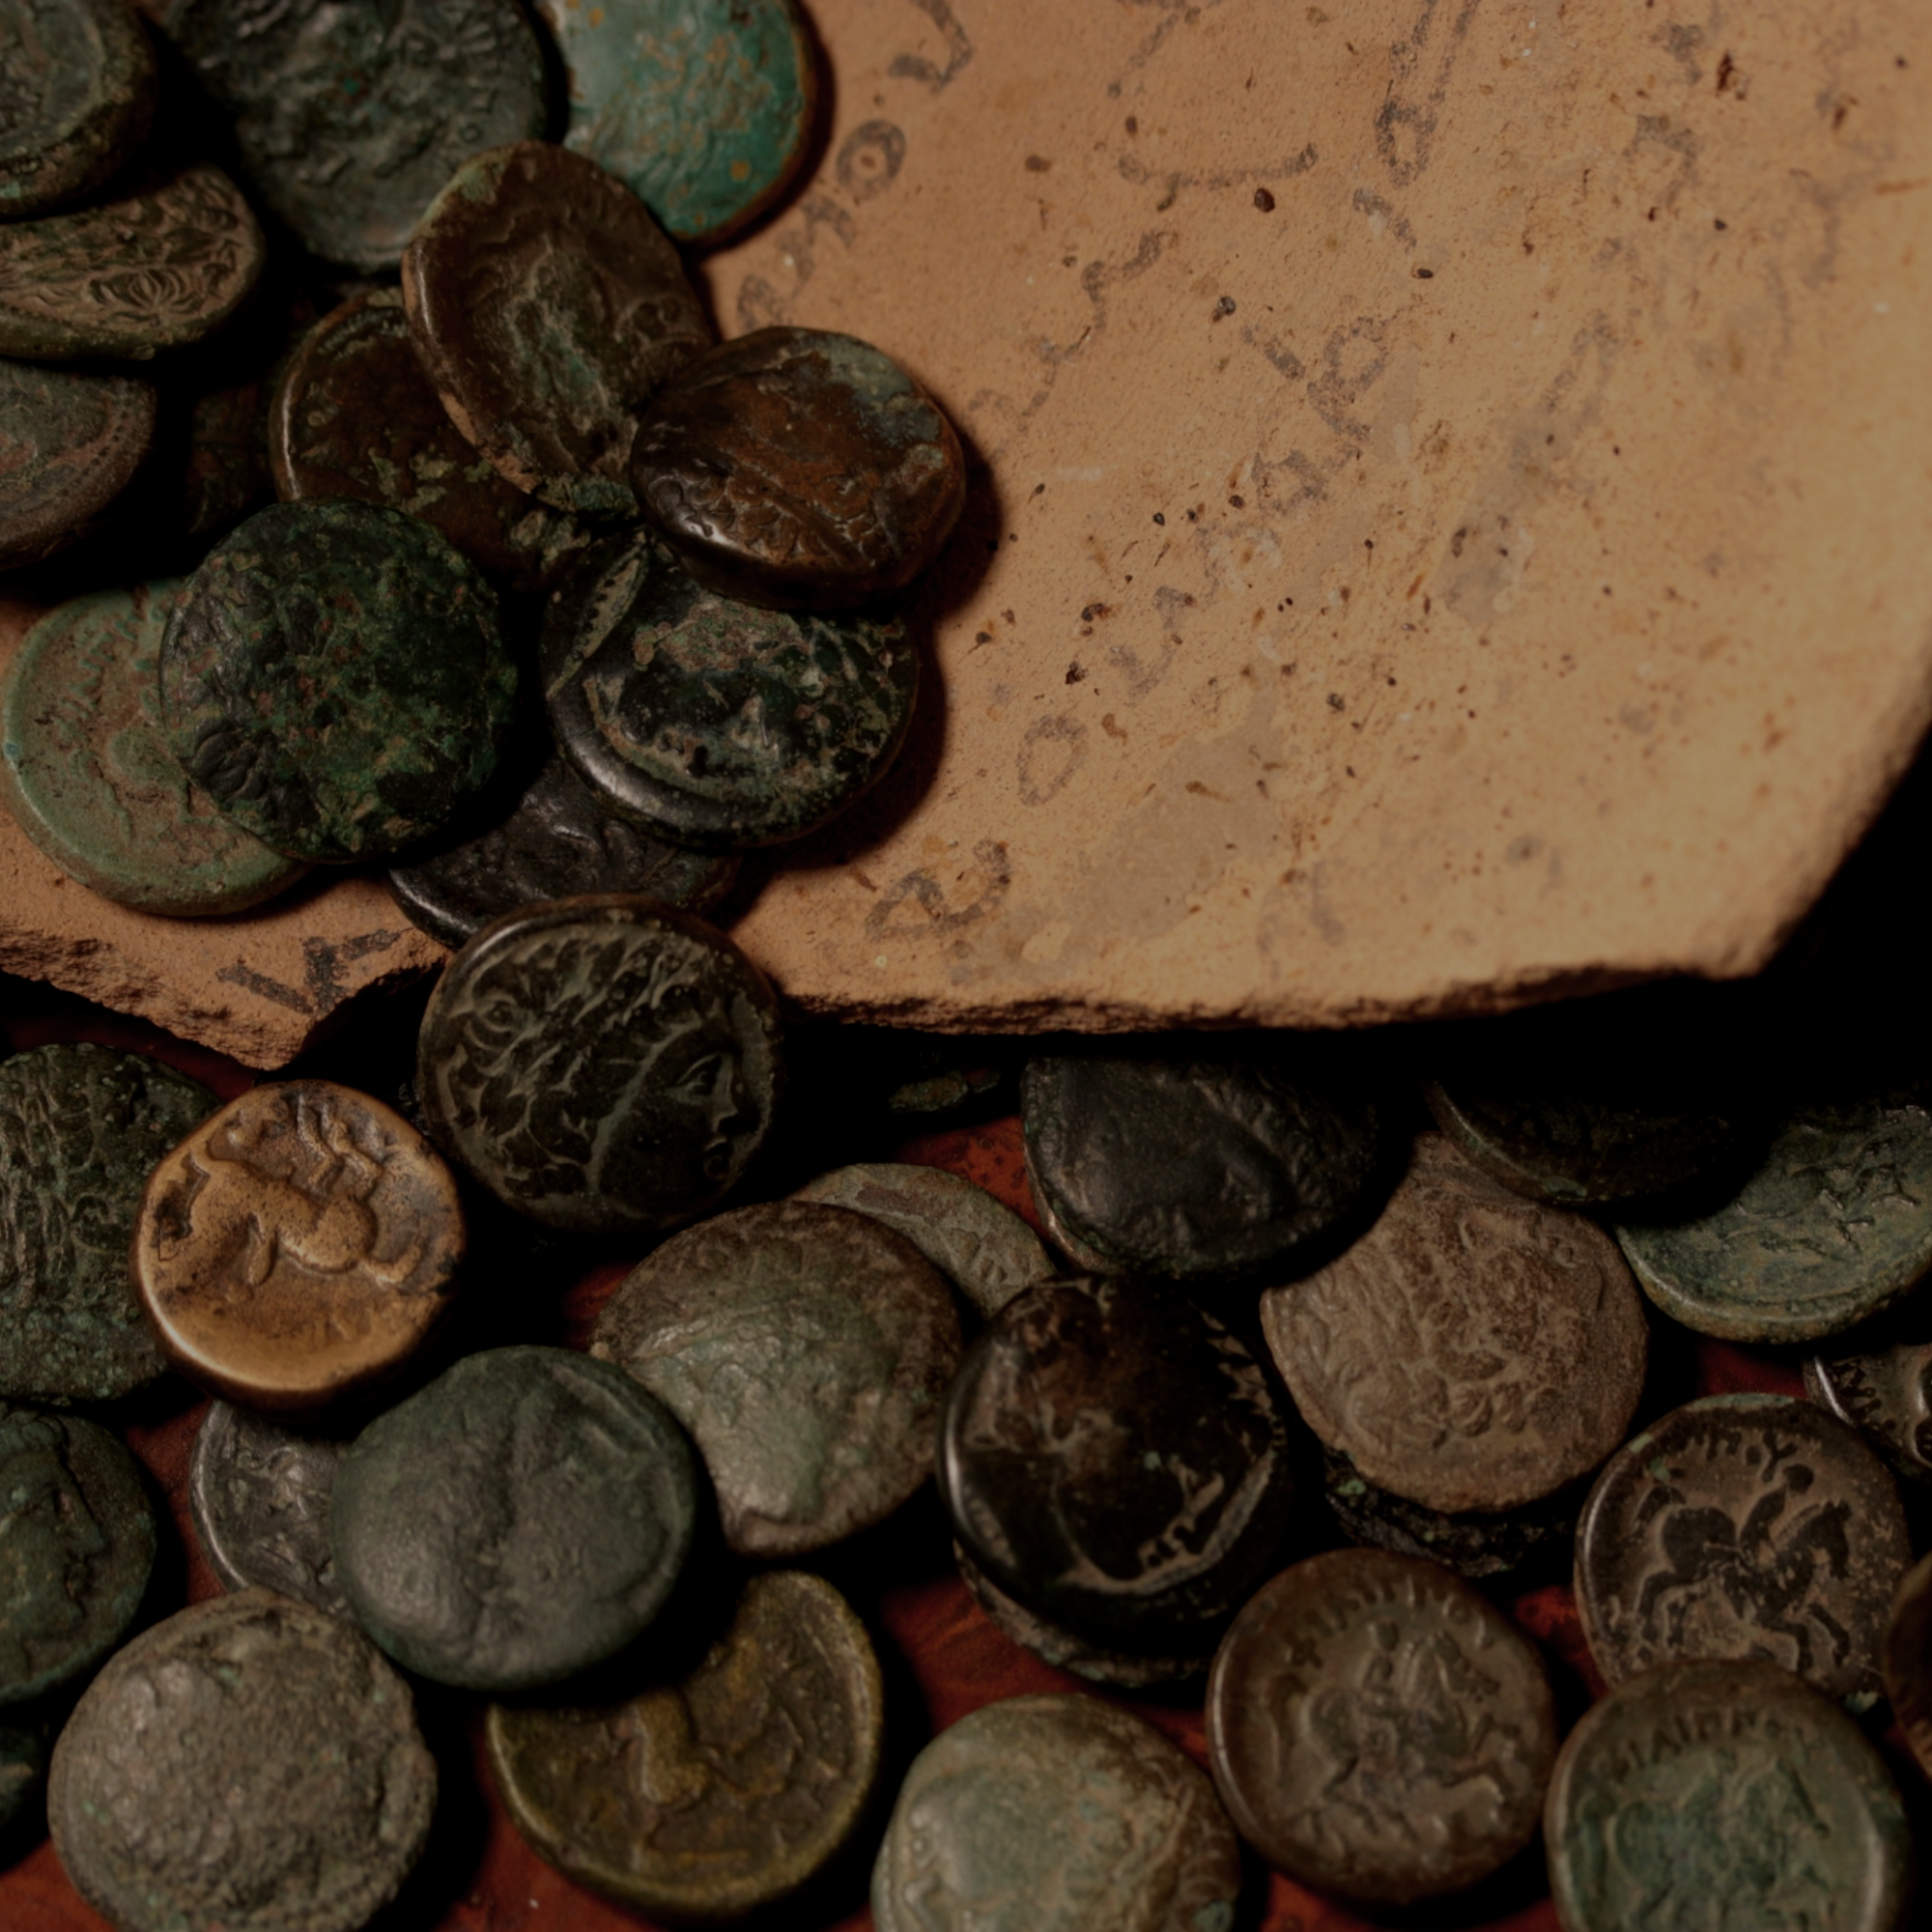 How is it possible to buy ancient coins?